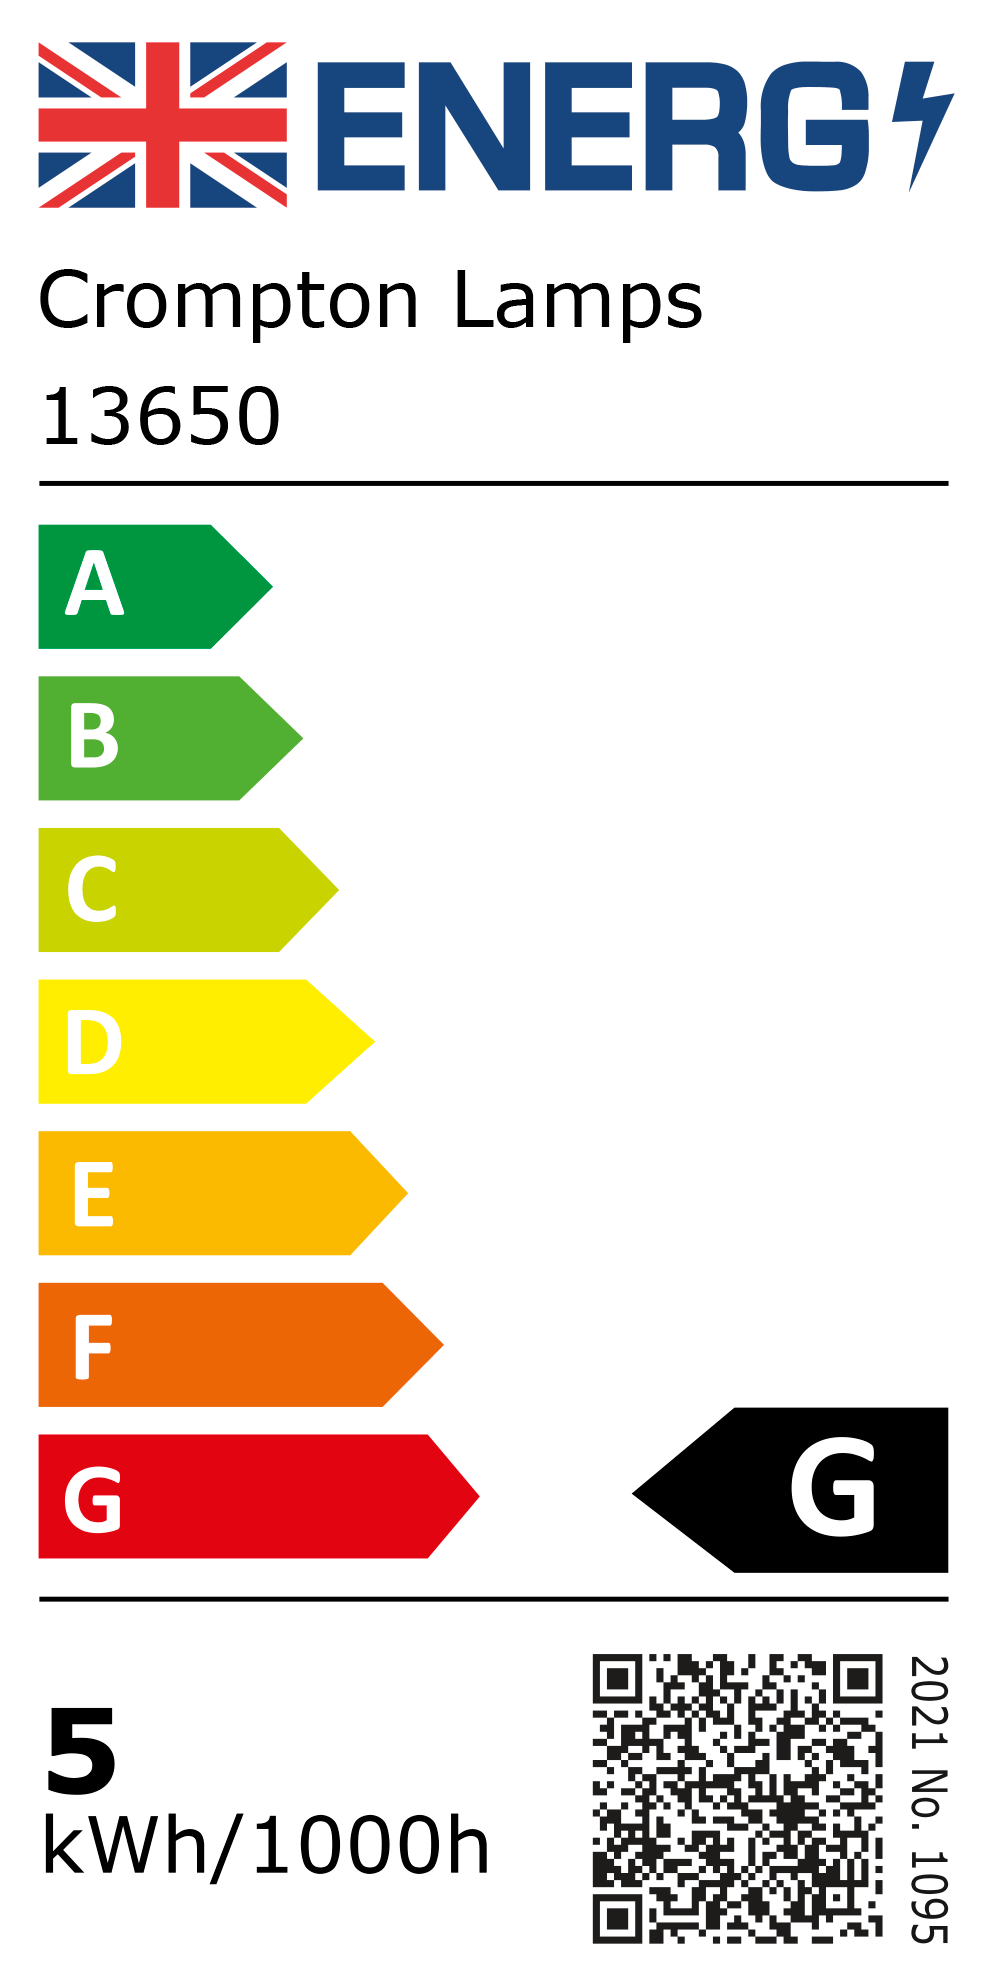 New 2021 Energy Rating Label: Stock Code 13650